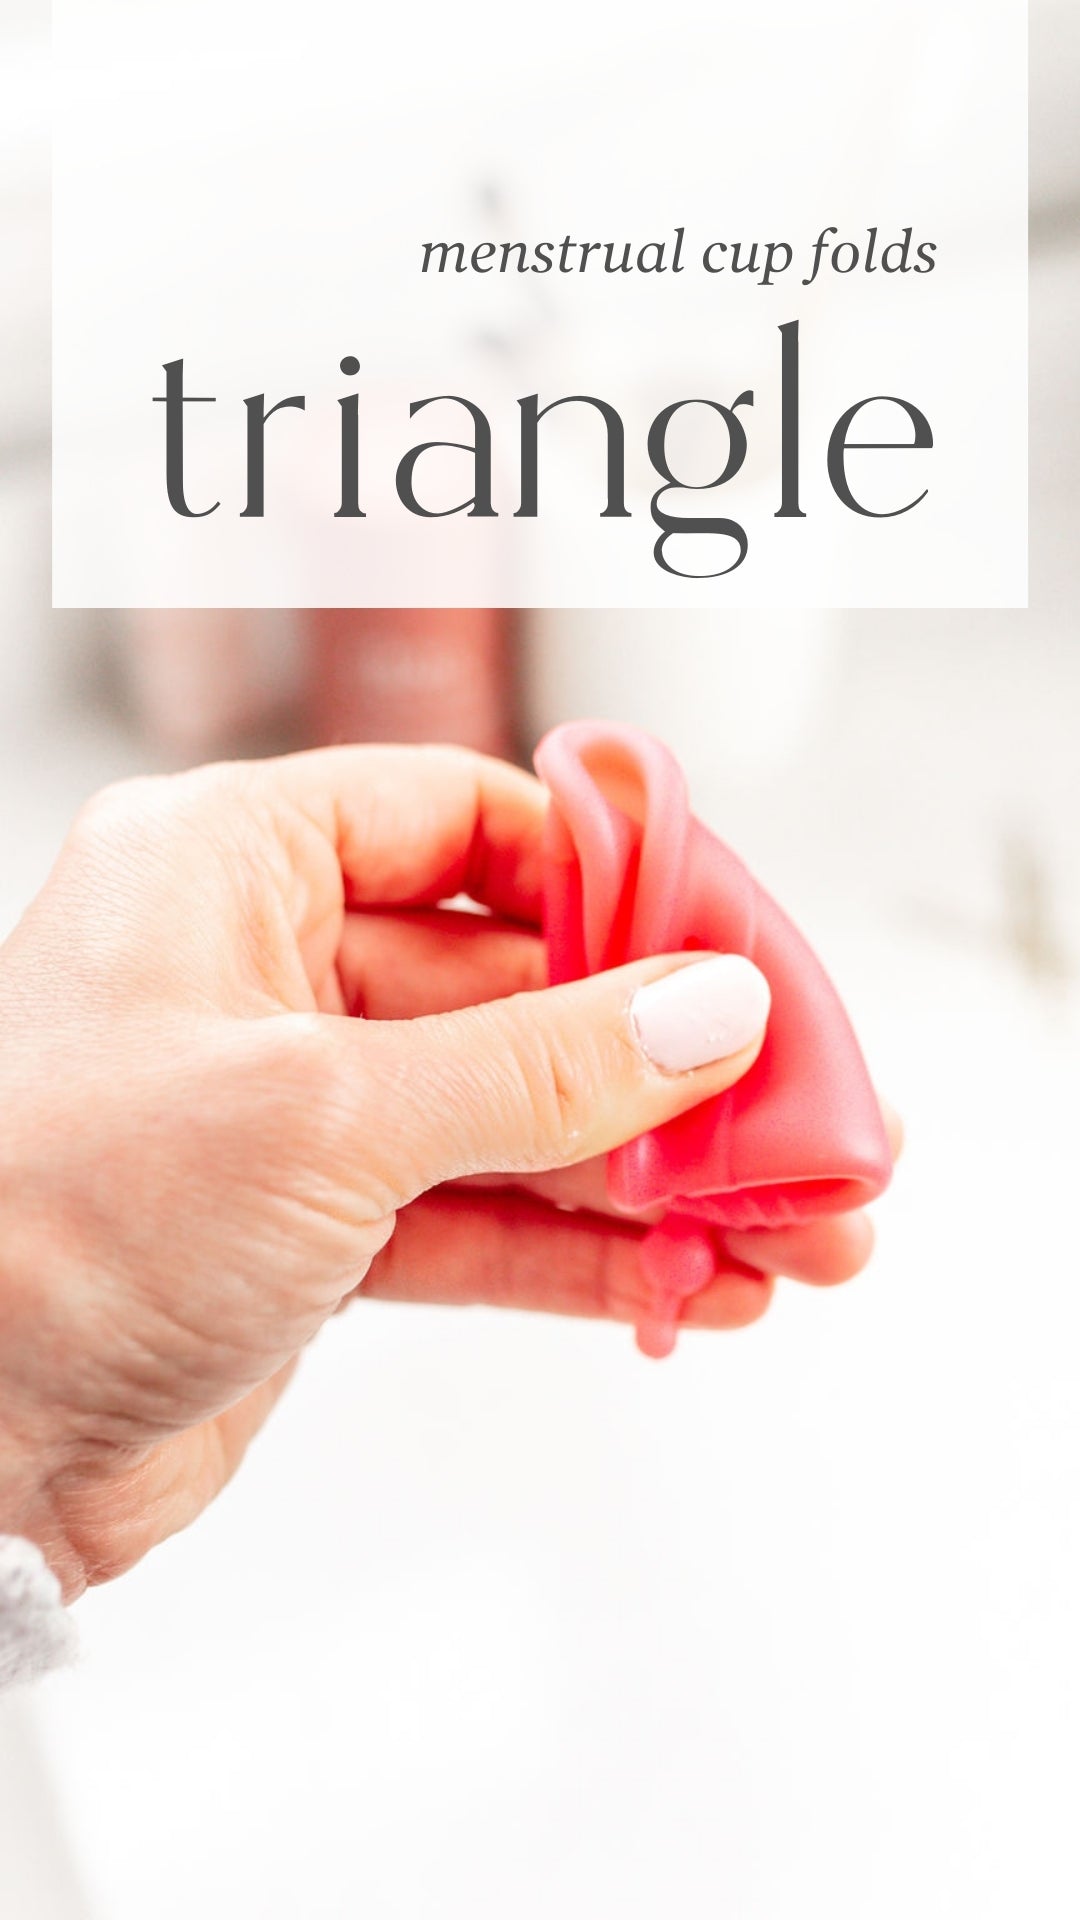 Triangle Fold for Menstrual Cup